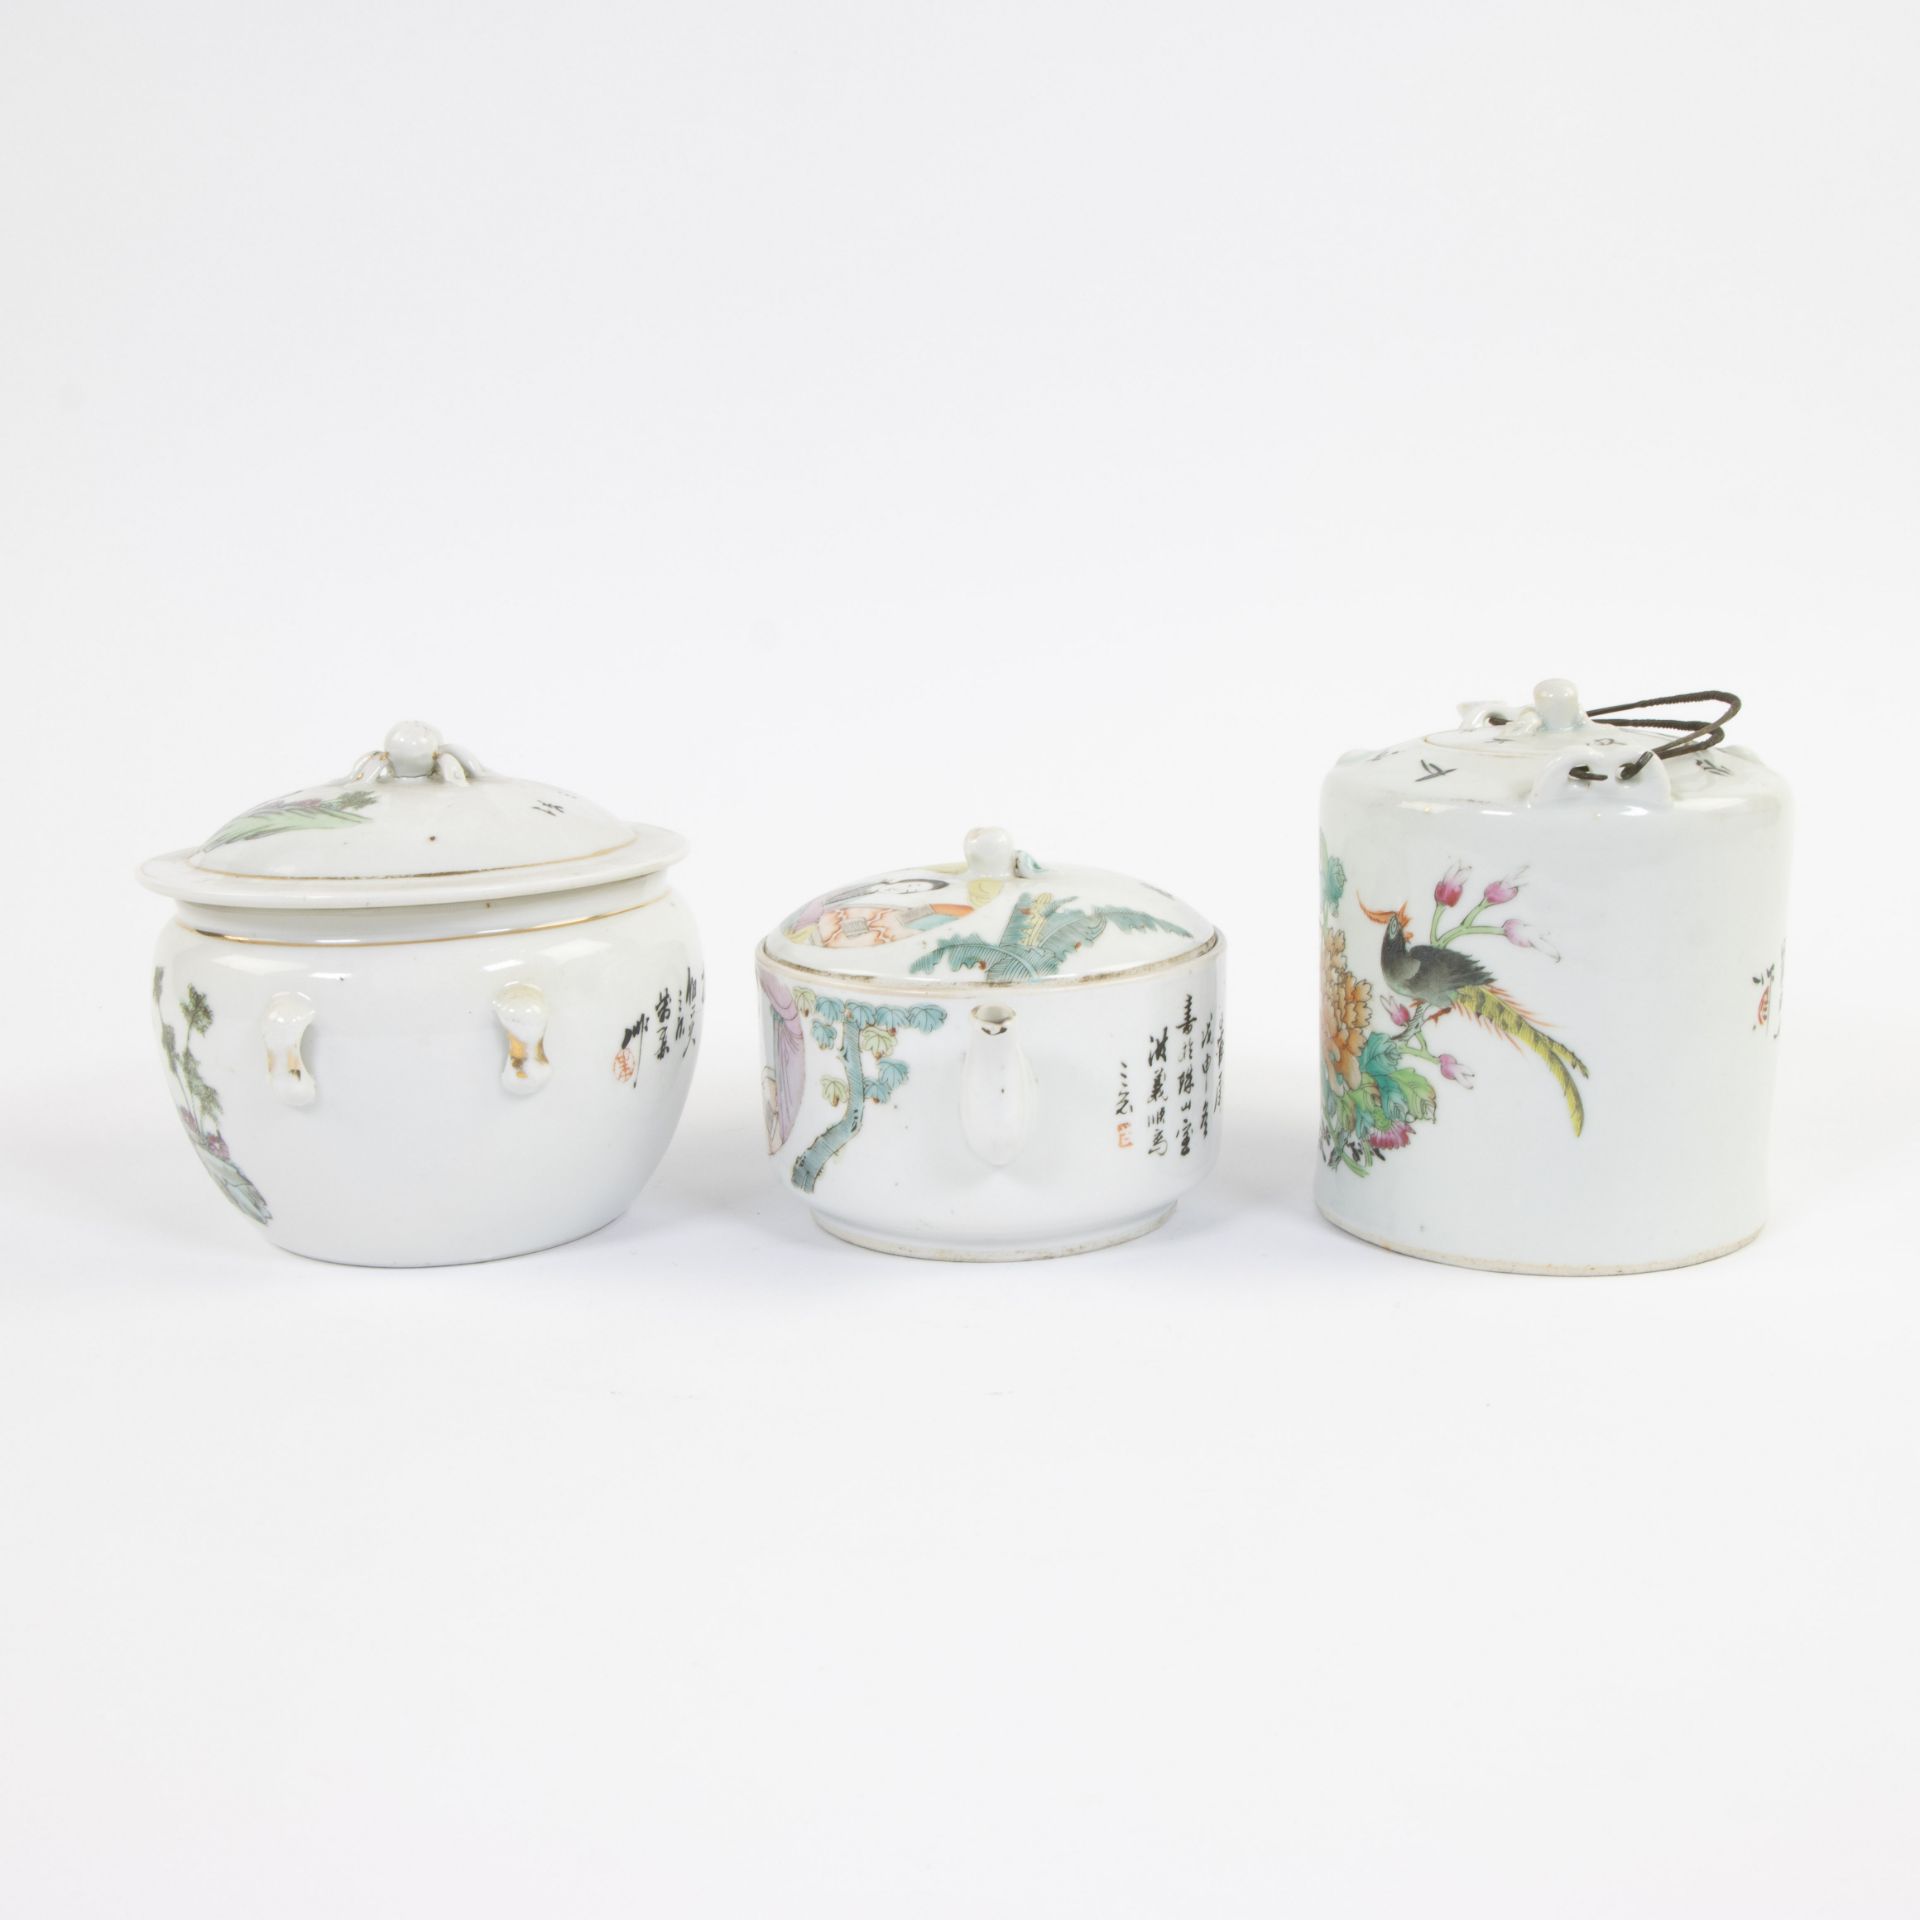 Collection of Chinese porcelain: 2 teapots and lidded bowl - Image 2 of 7